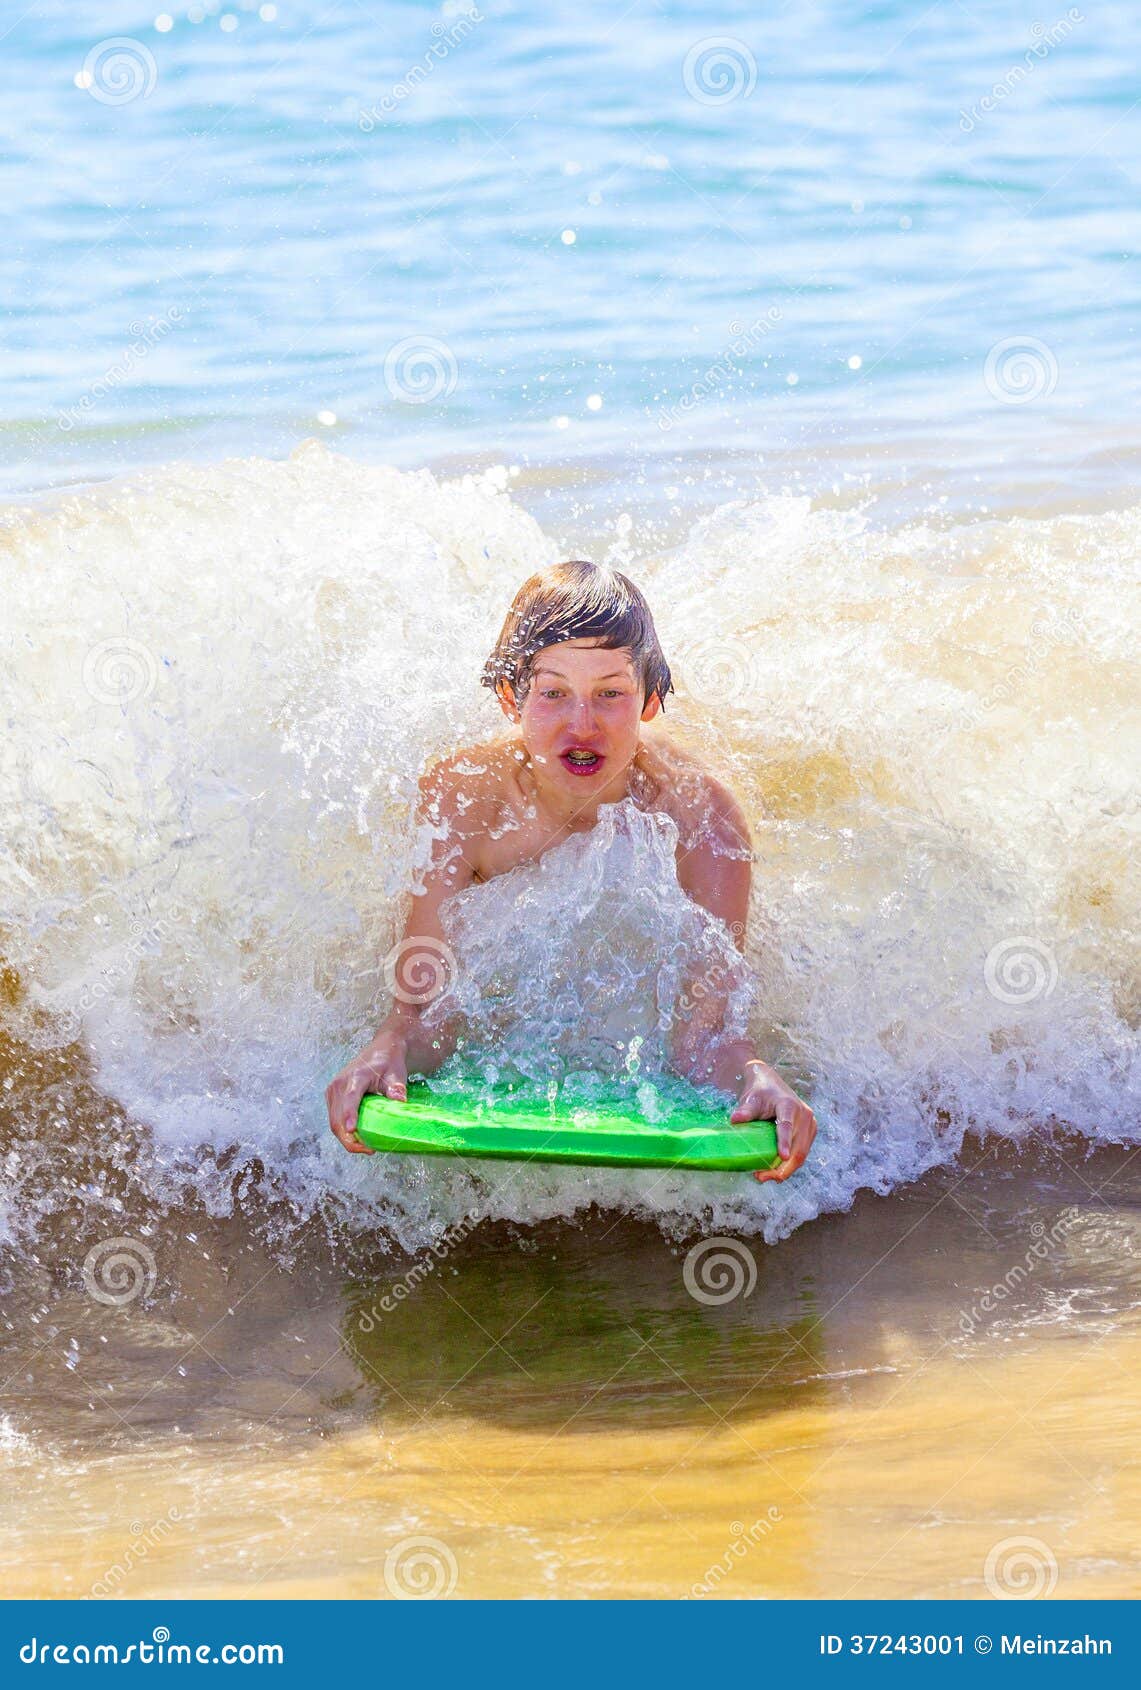 Boy Has Fun in the Waves of the Ocean Stock Image - Image of sport ...